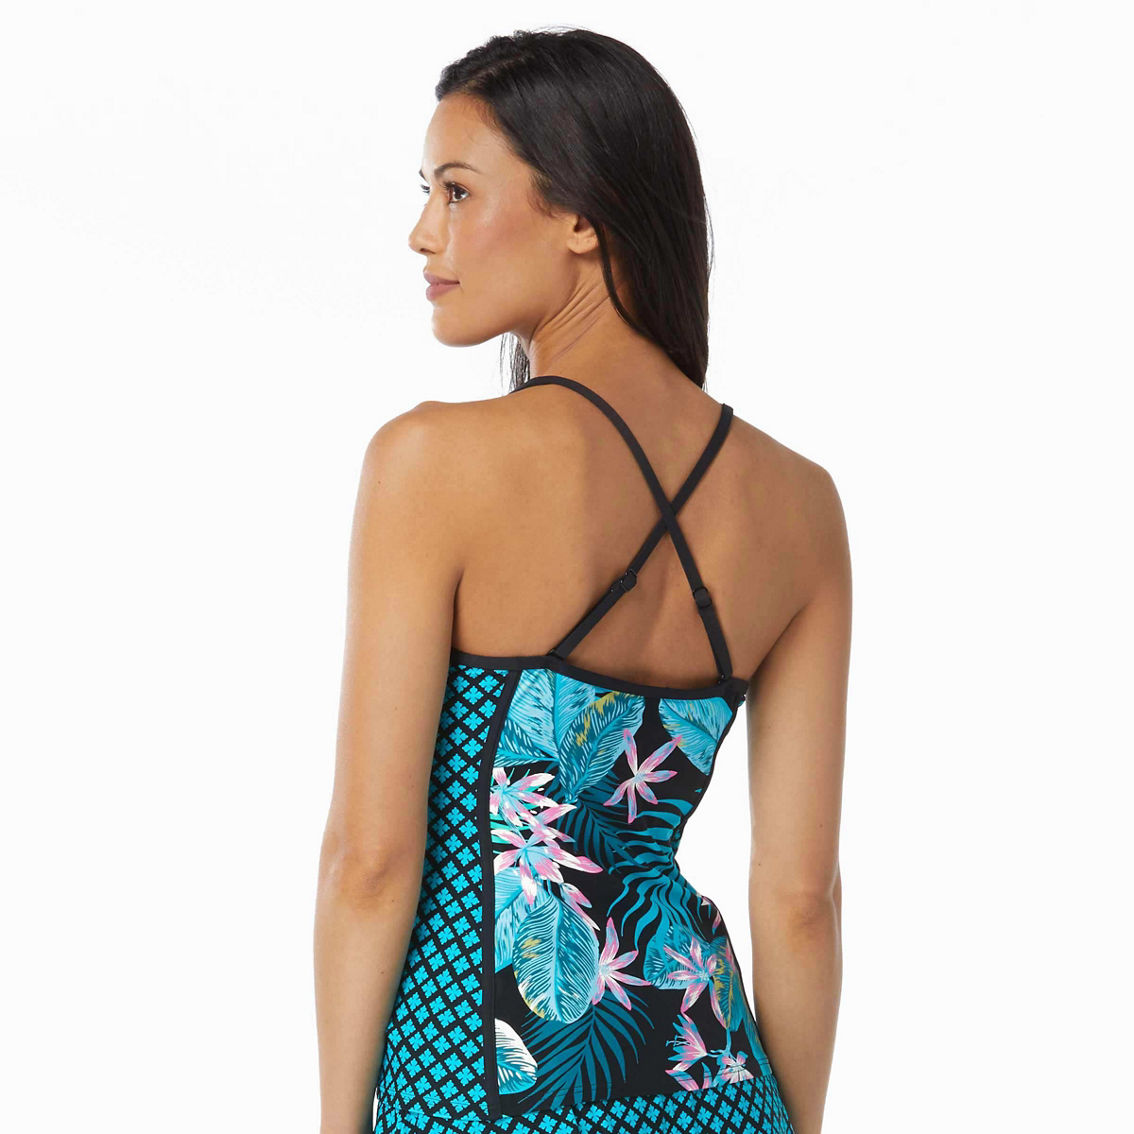 Beach House Ambition Fitted Cross Back Tankini Top - Image 4 of 5